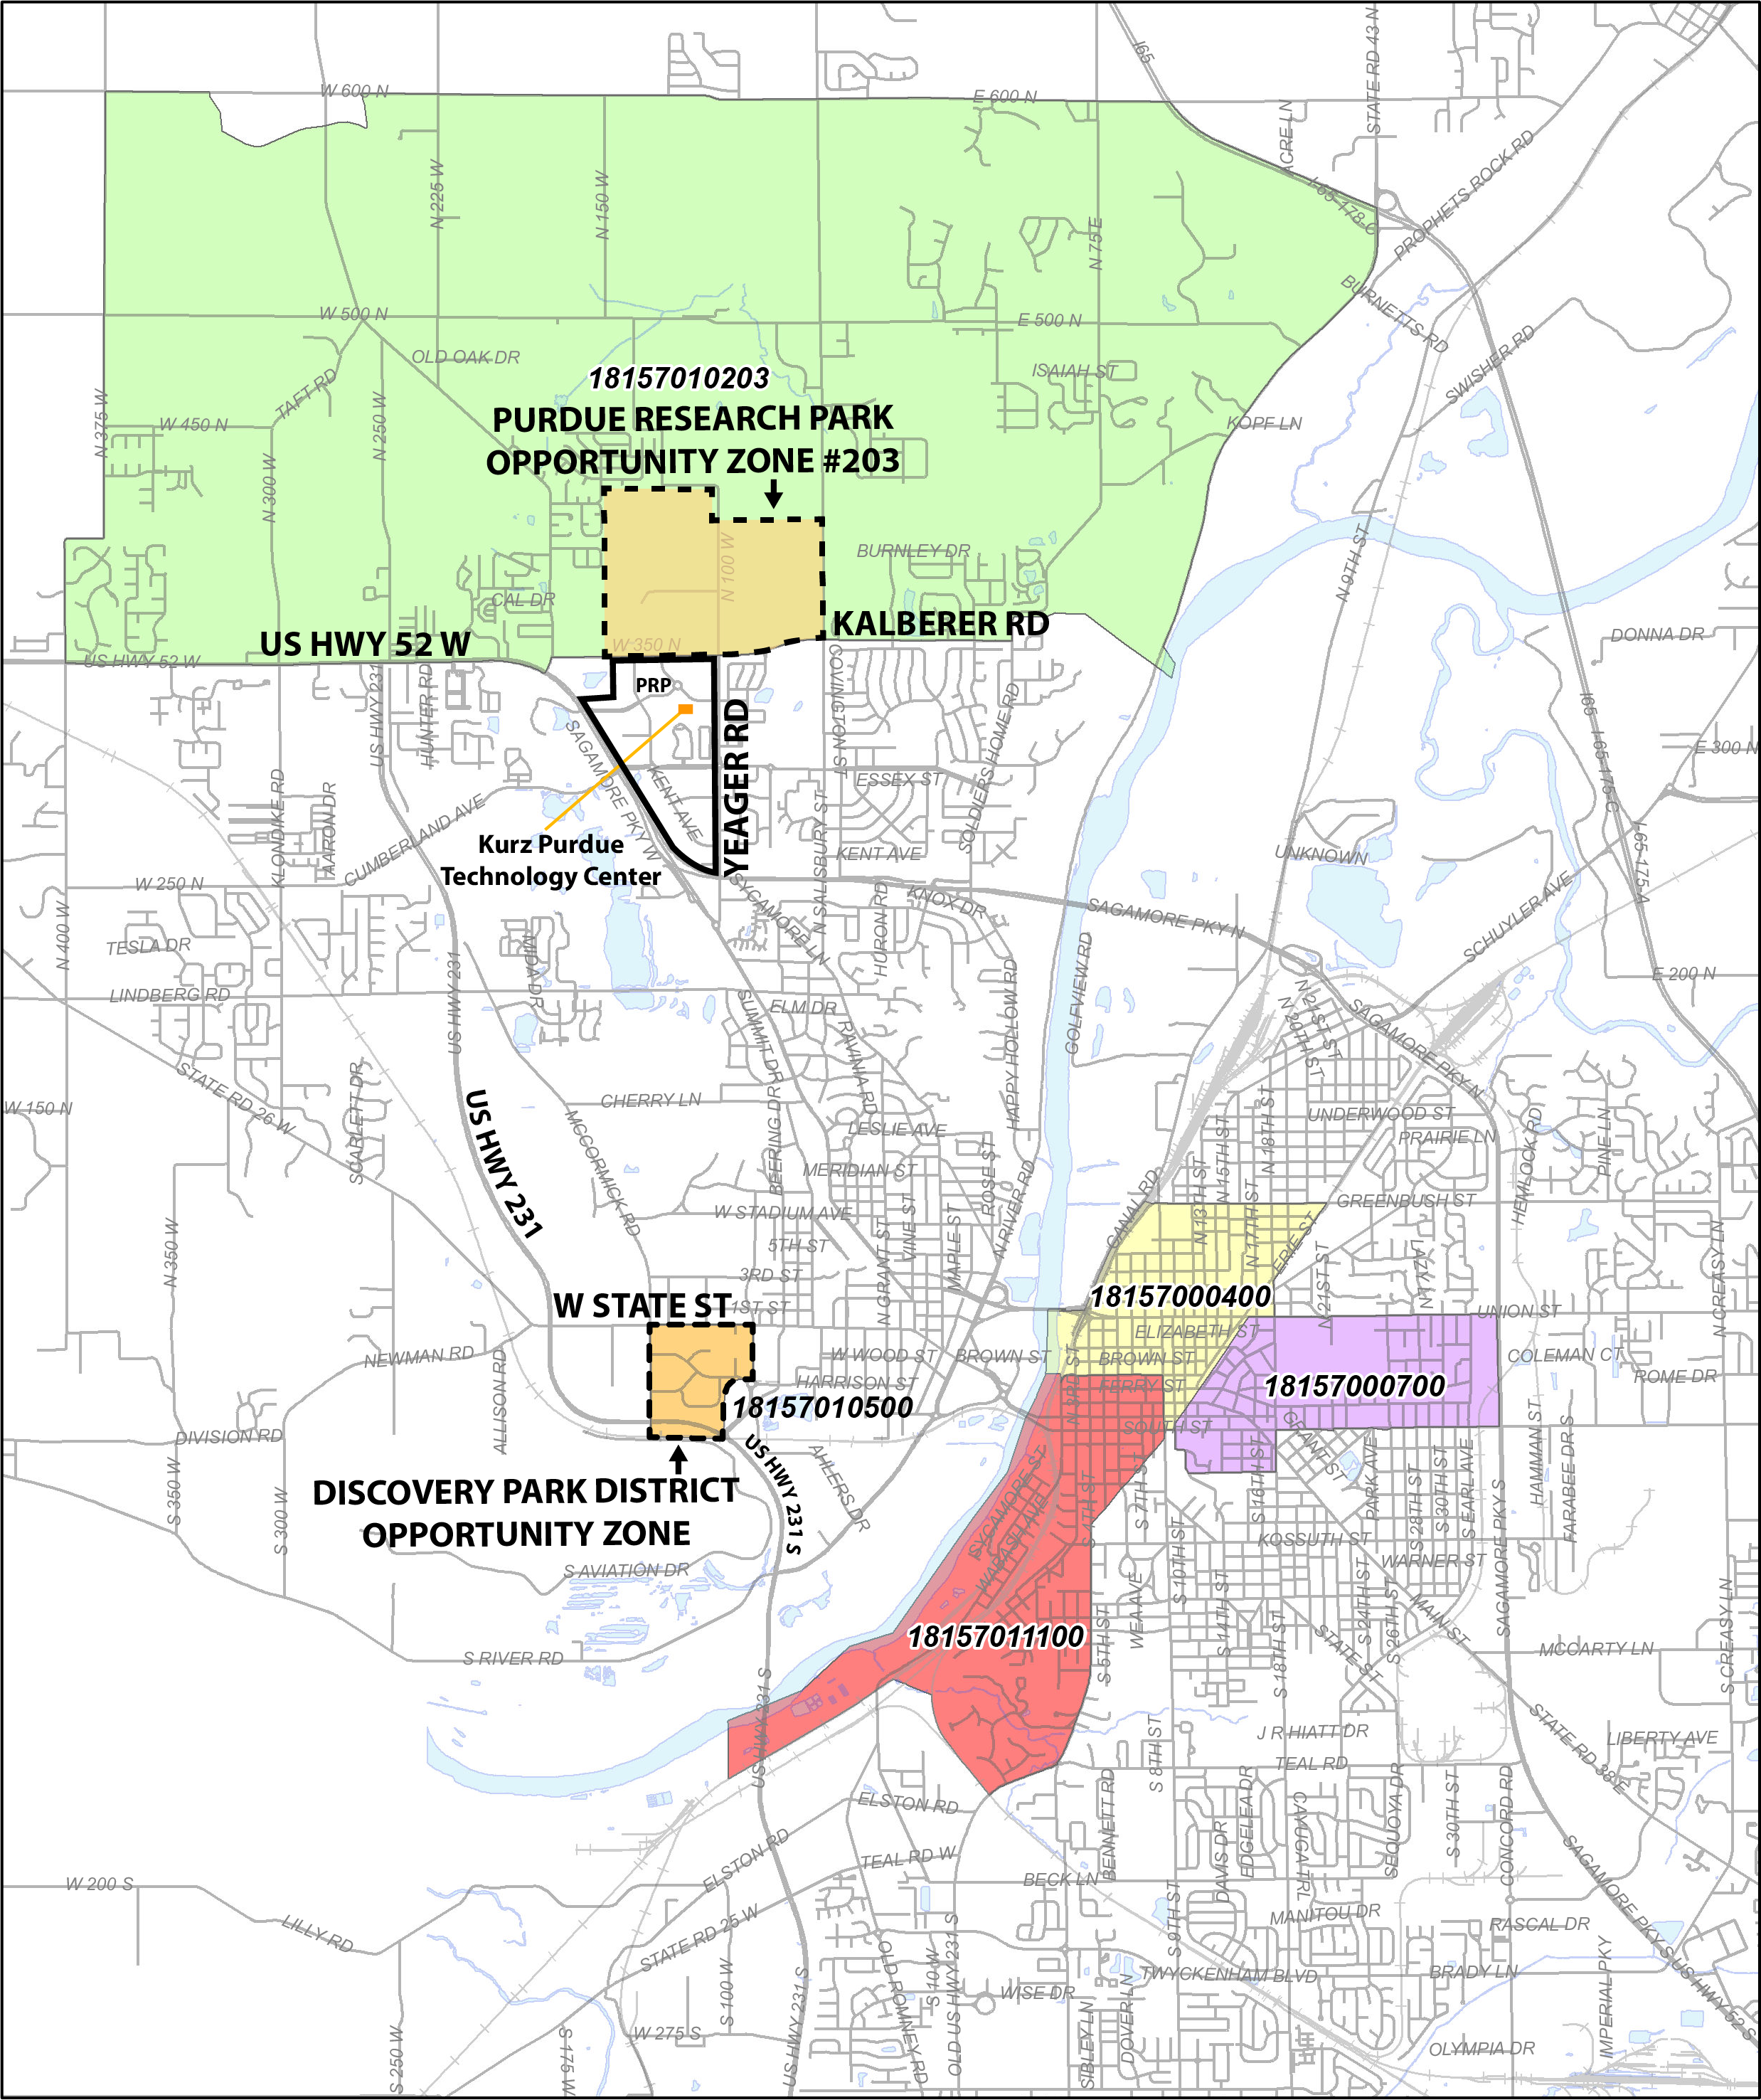 Map of opportunity zones in the Purdue Research Park.